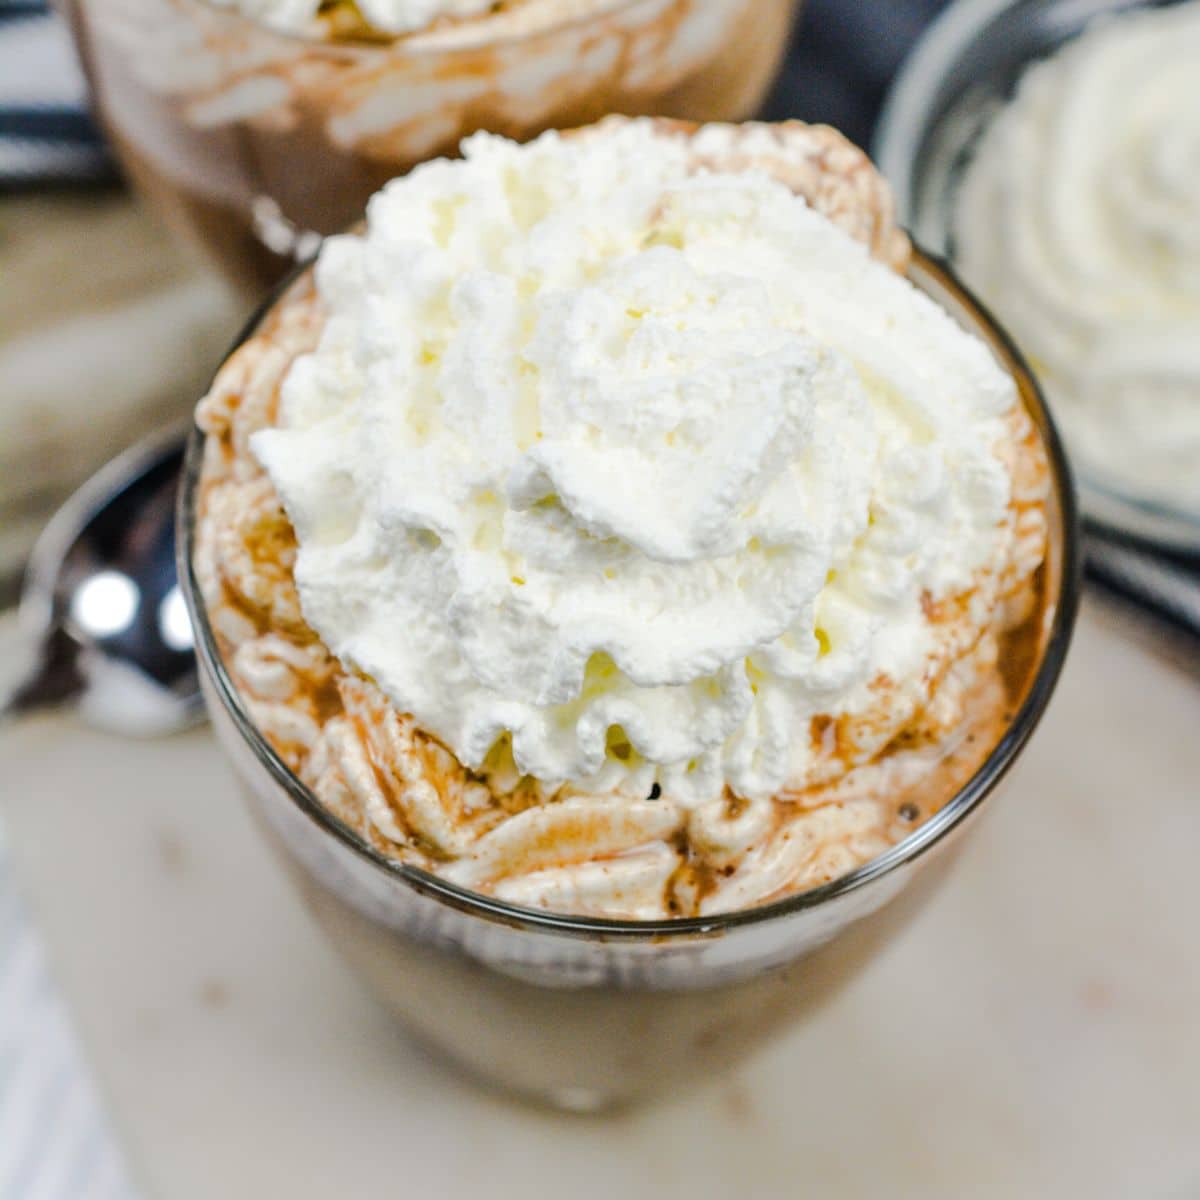 Square image of keto friendly sugar free hot chocolate served in clear glass and topped with whipped cream.